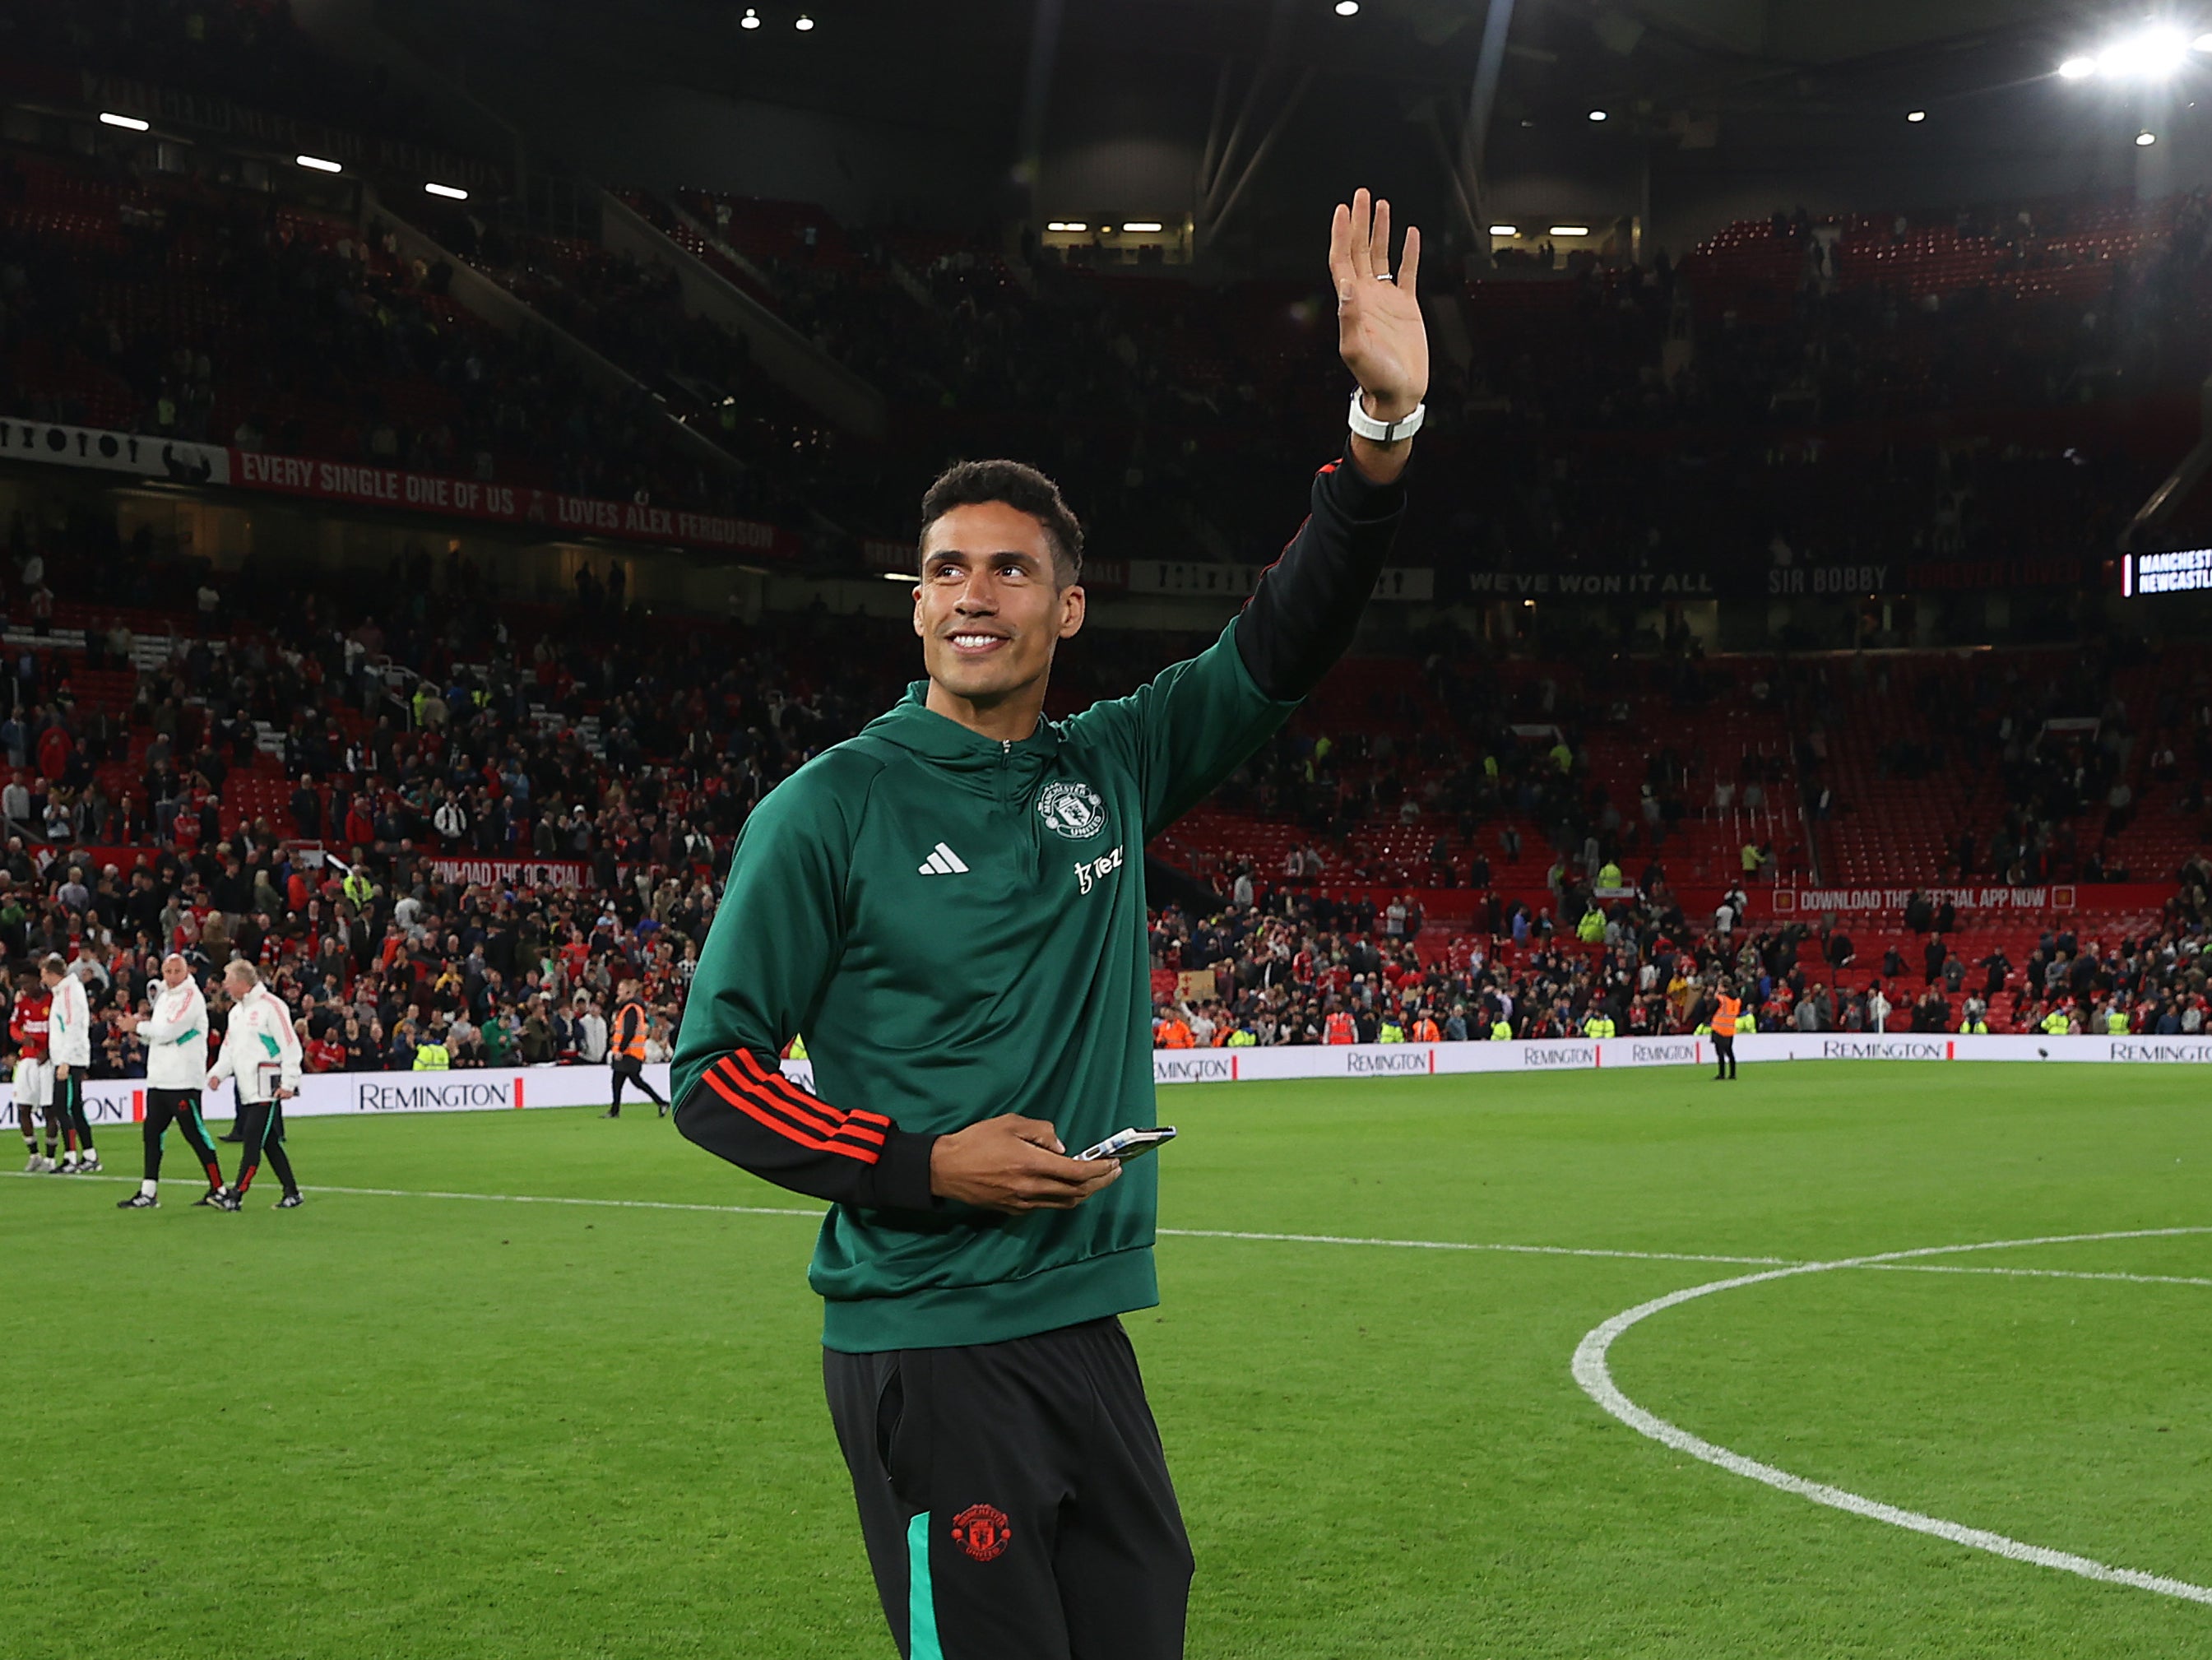 Raphael Varane of Manchester United says goodbye to the fans